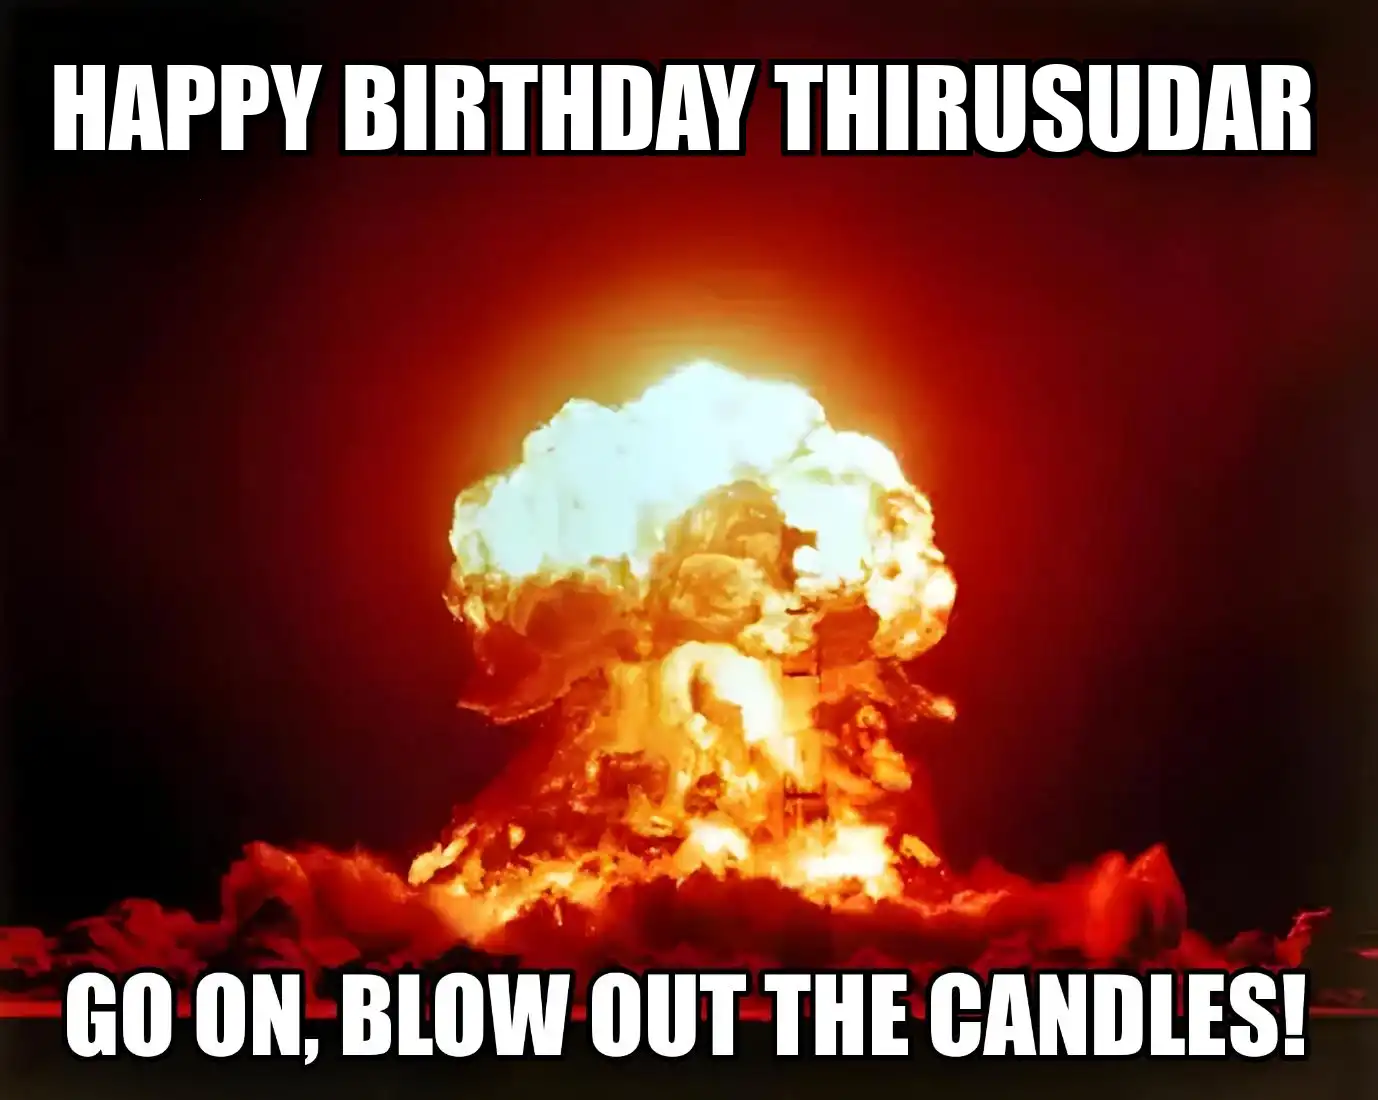 Happy Birthday Thirusudar Go On Blow Out The Candles Meme